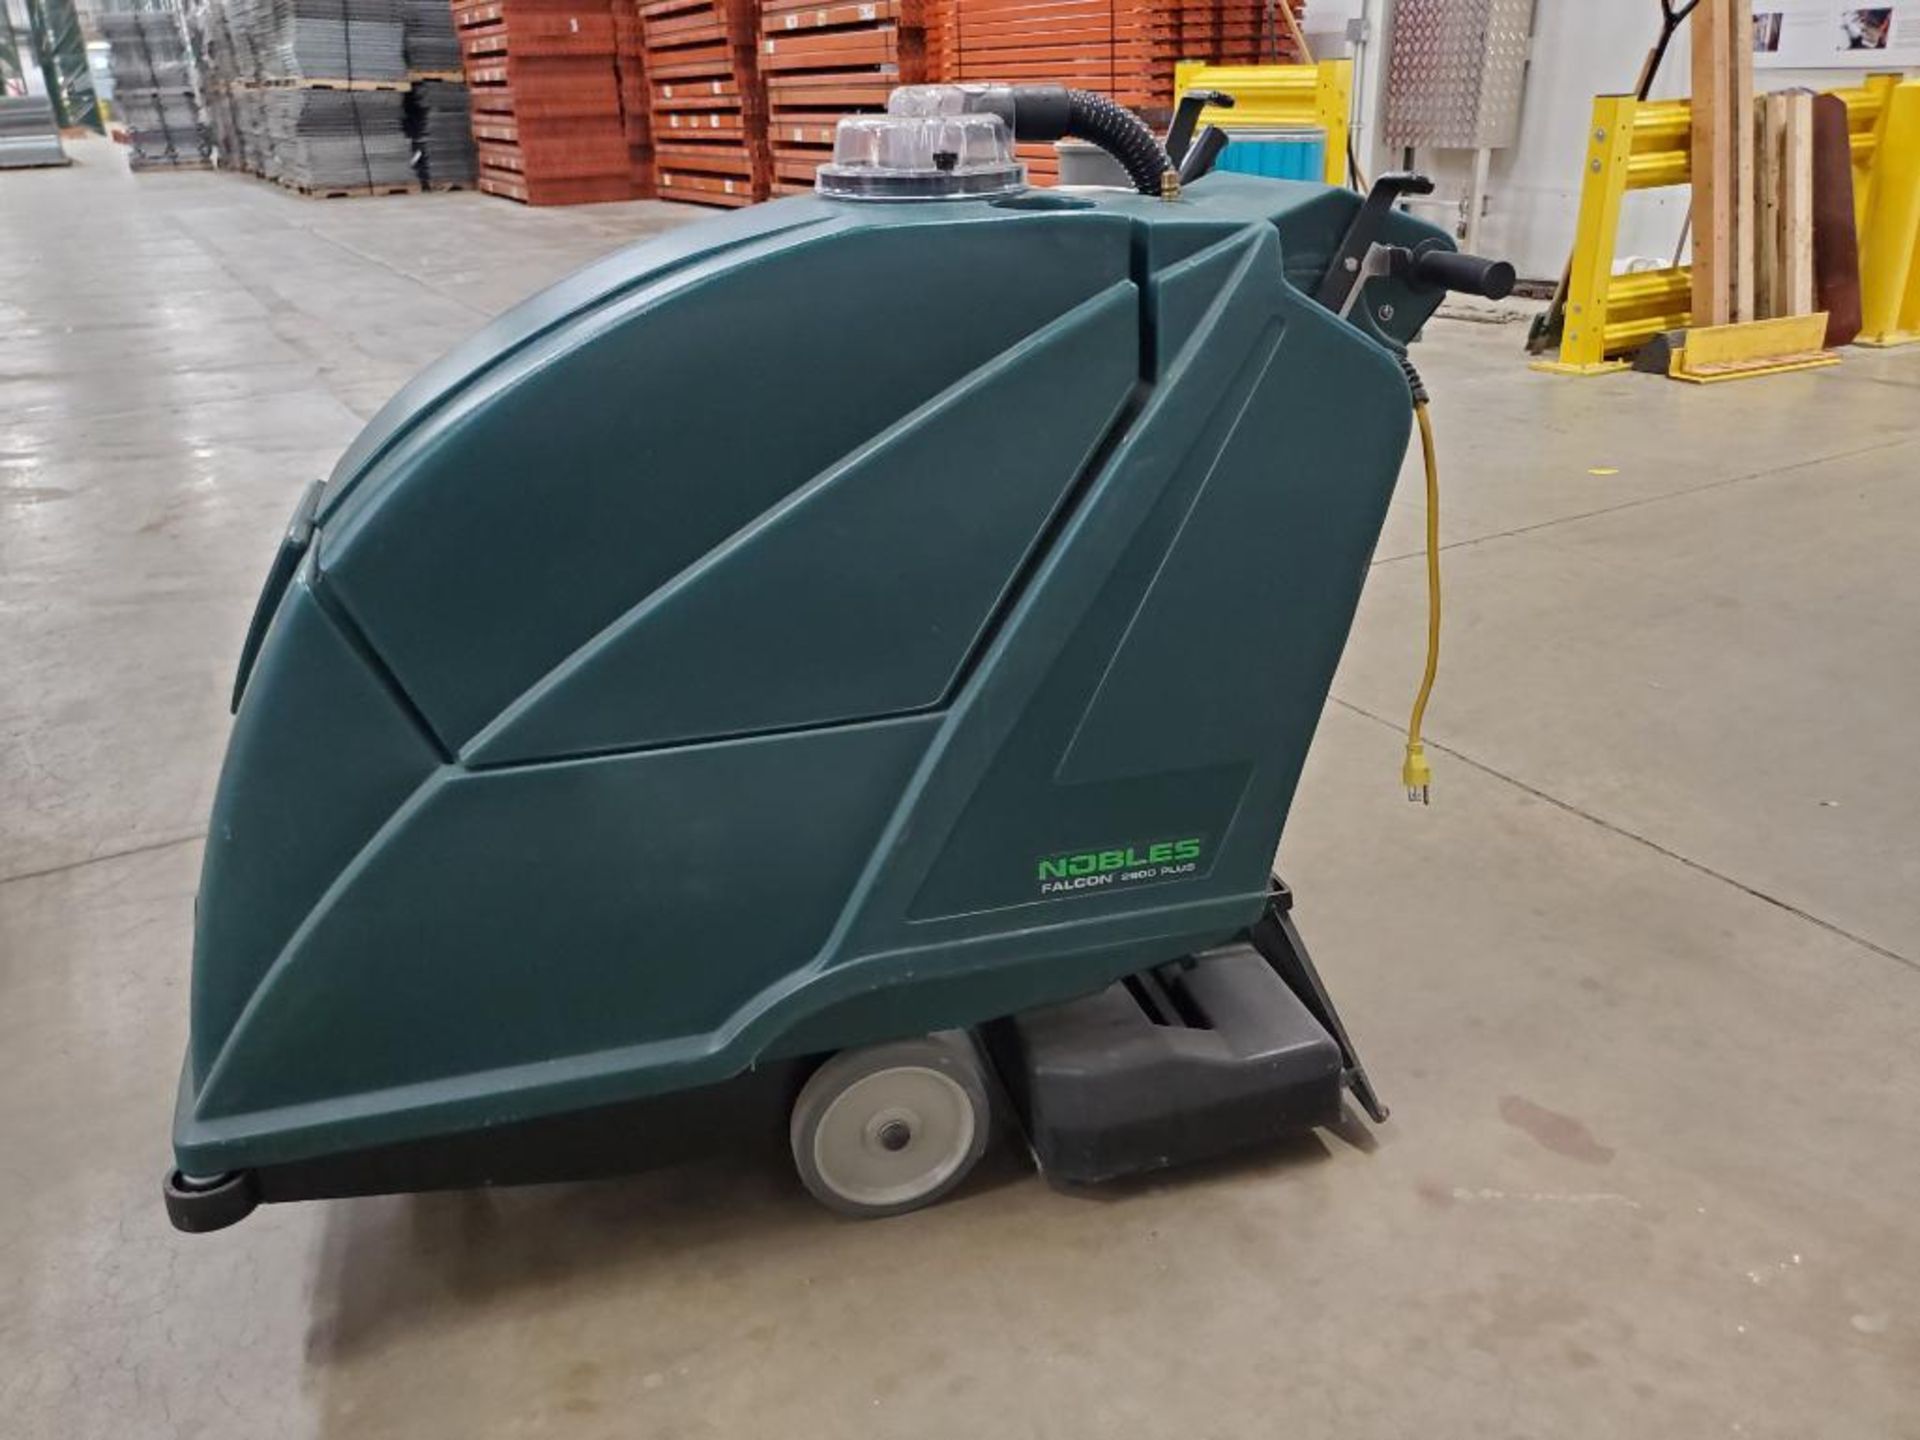 TENANT NOBLES ELECTRIC WALK BEHIND EXTRACTOR; MODEL FALCON 2800, 120-VAC, 60-HZ ***LOCATED AT